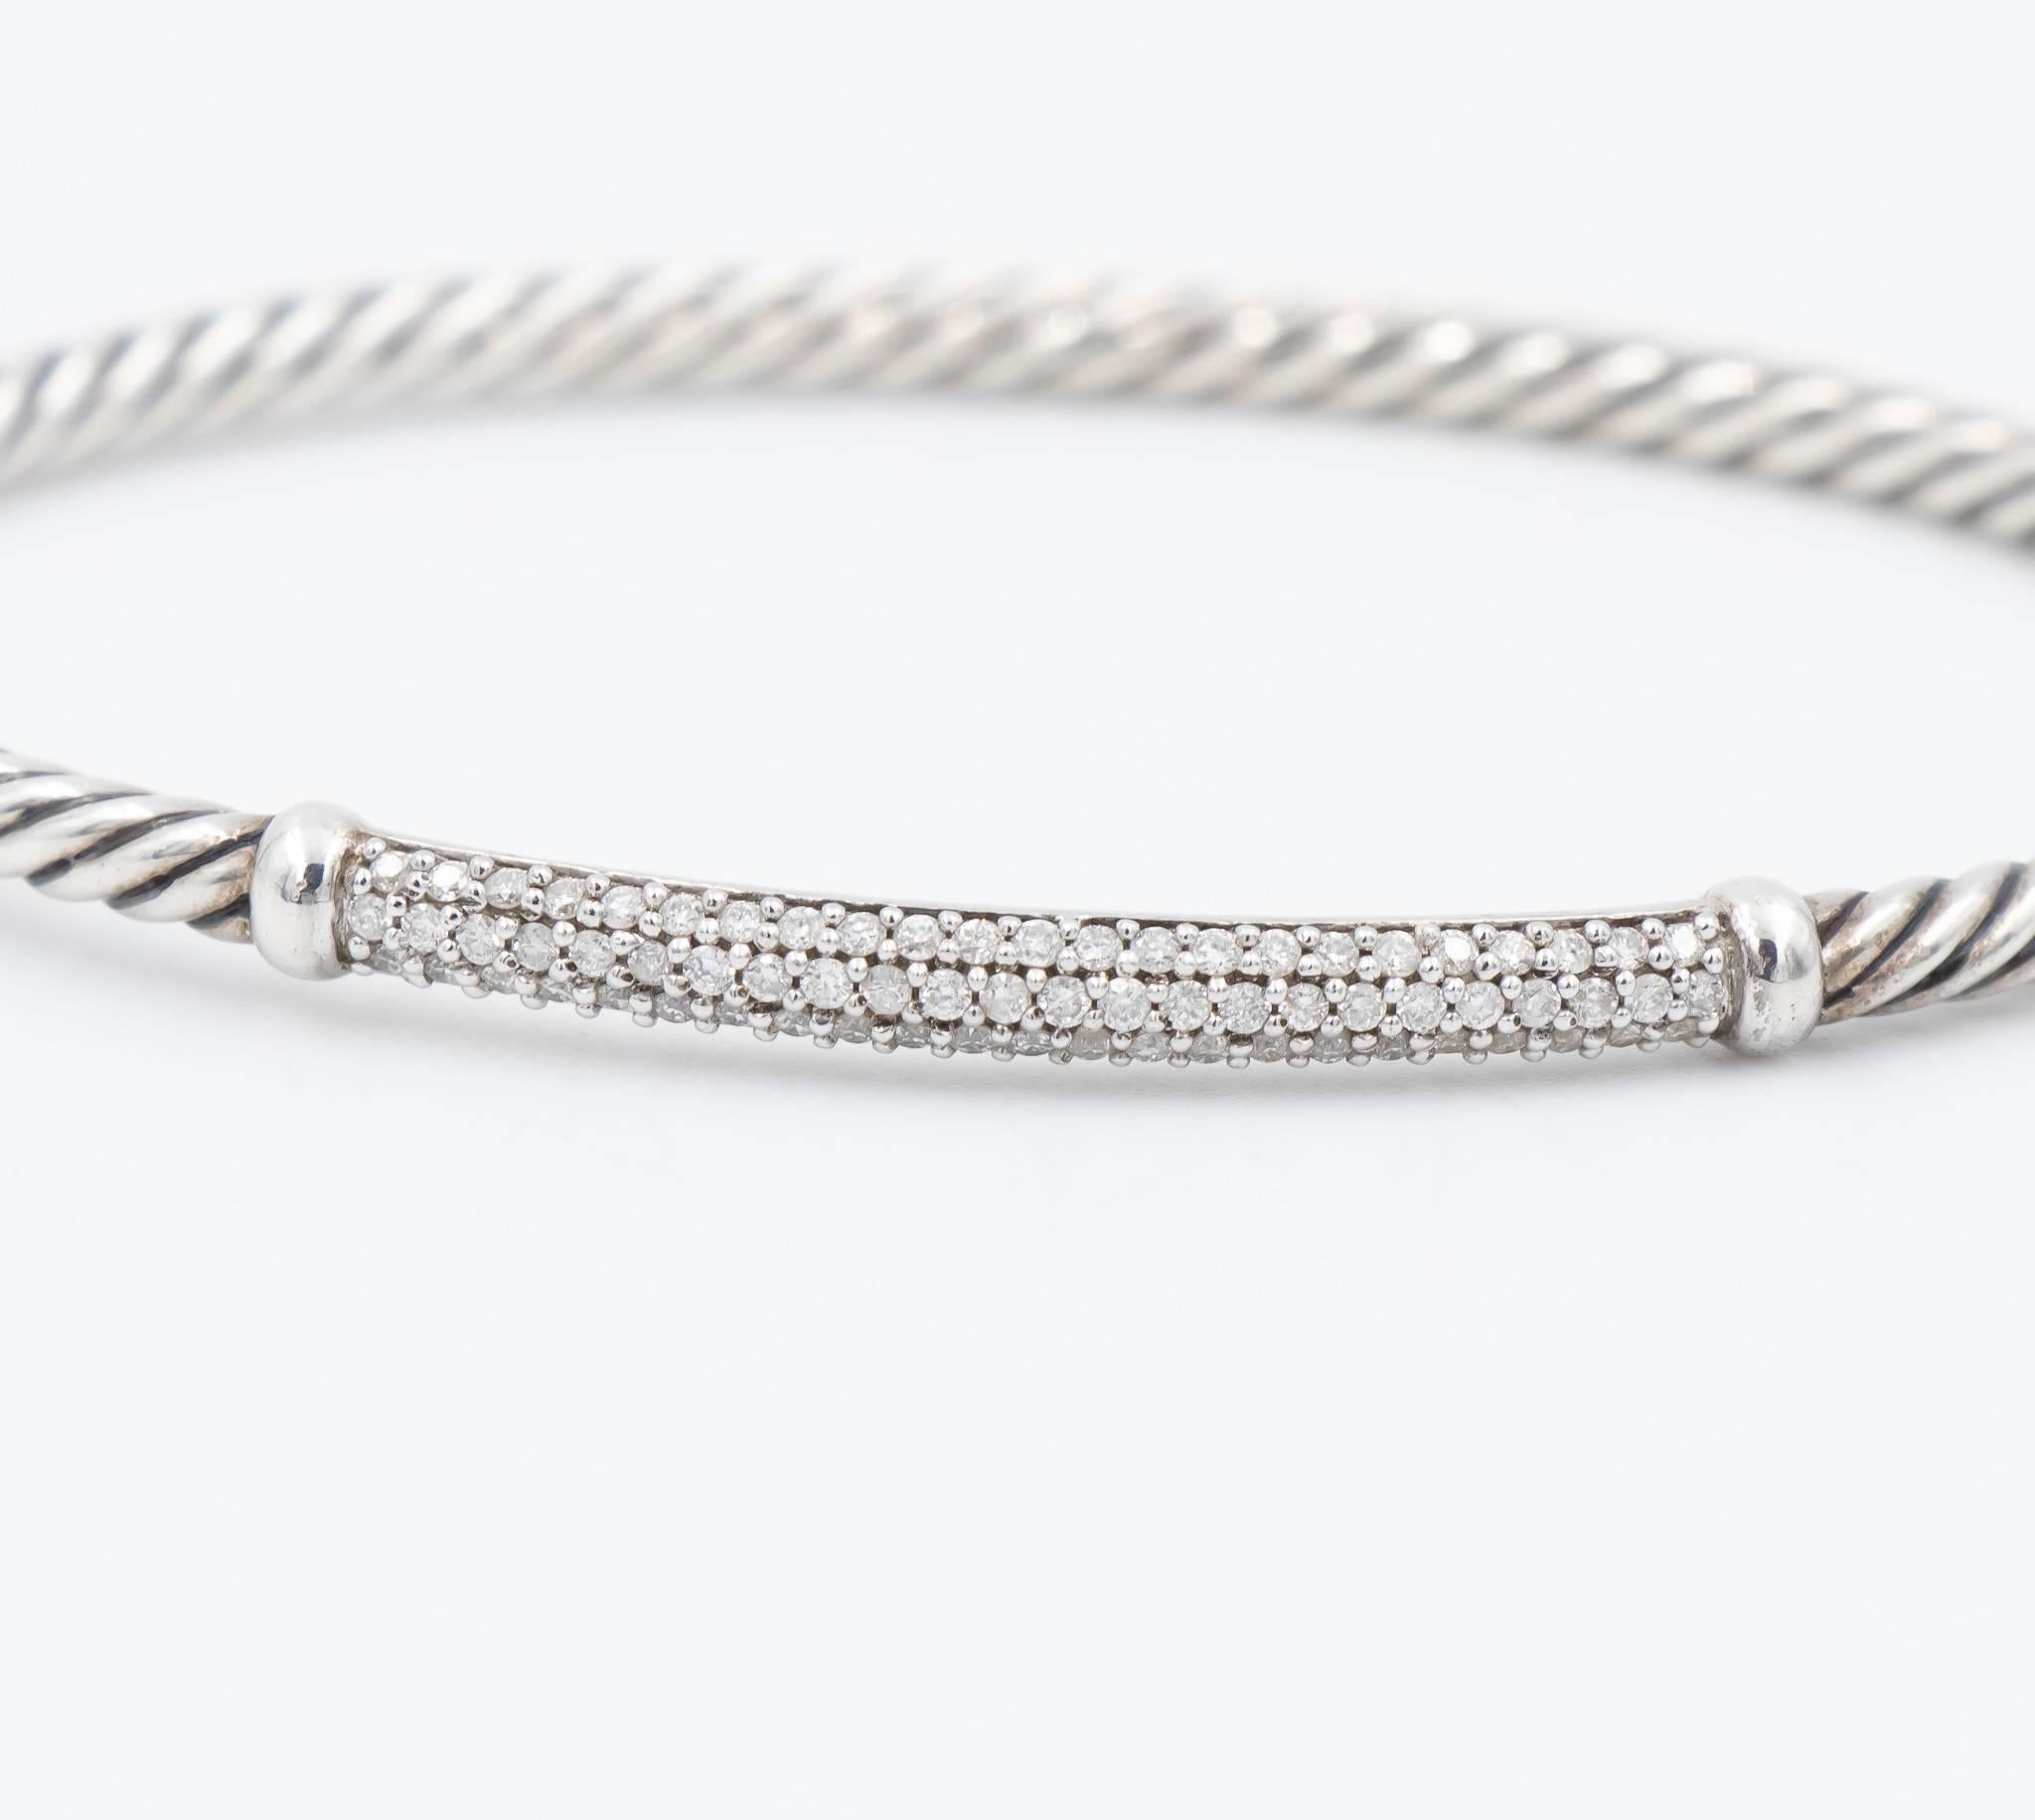 This beautiful David Yurman bracelet has diamonds set on the silver bar atop the cable wrap cuff bracelet design.  The width of the bracelet cable wrap is 3mm and features a hinge clasp.  This is a great bracelet to stack with other designs or